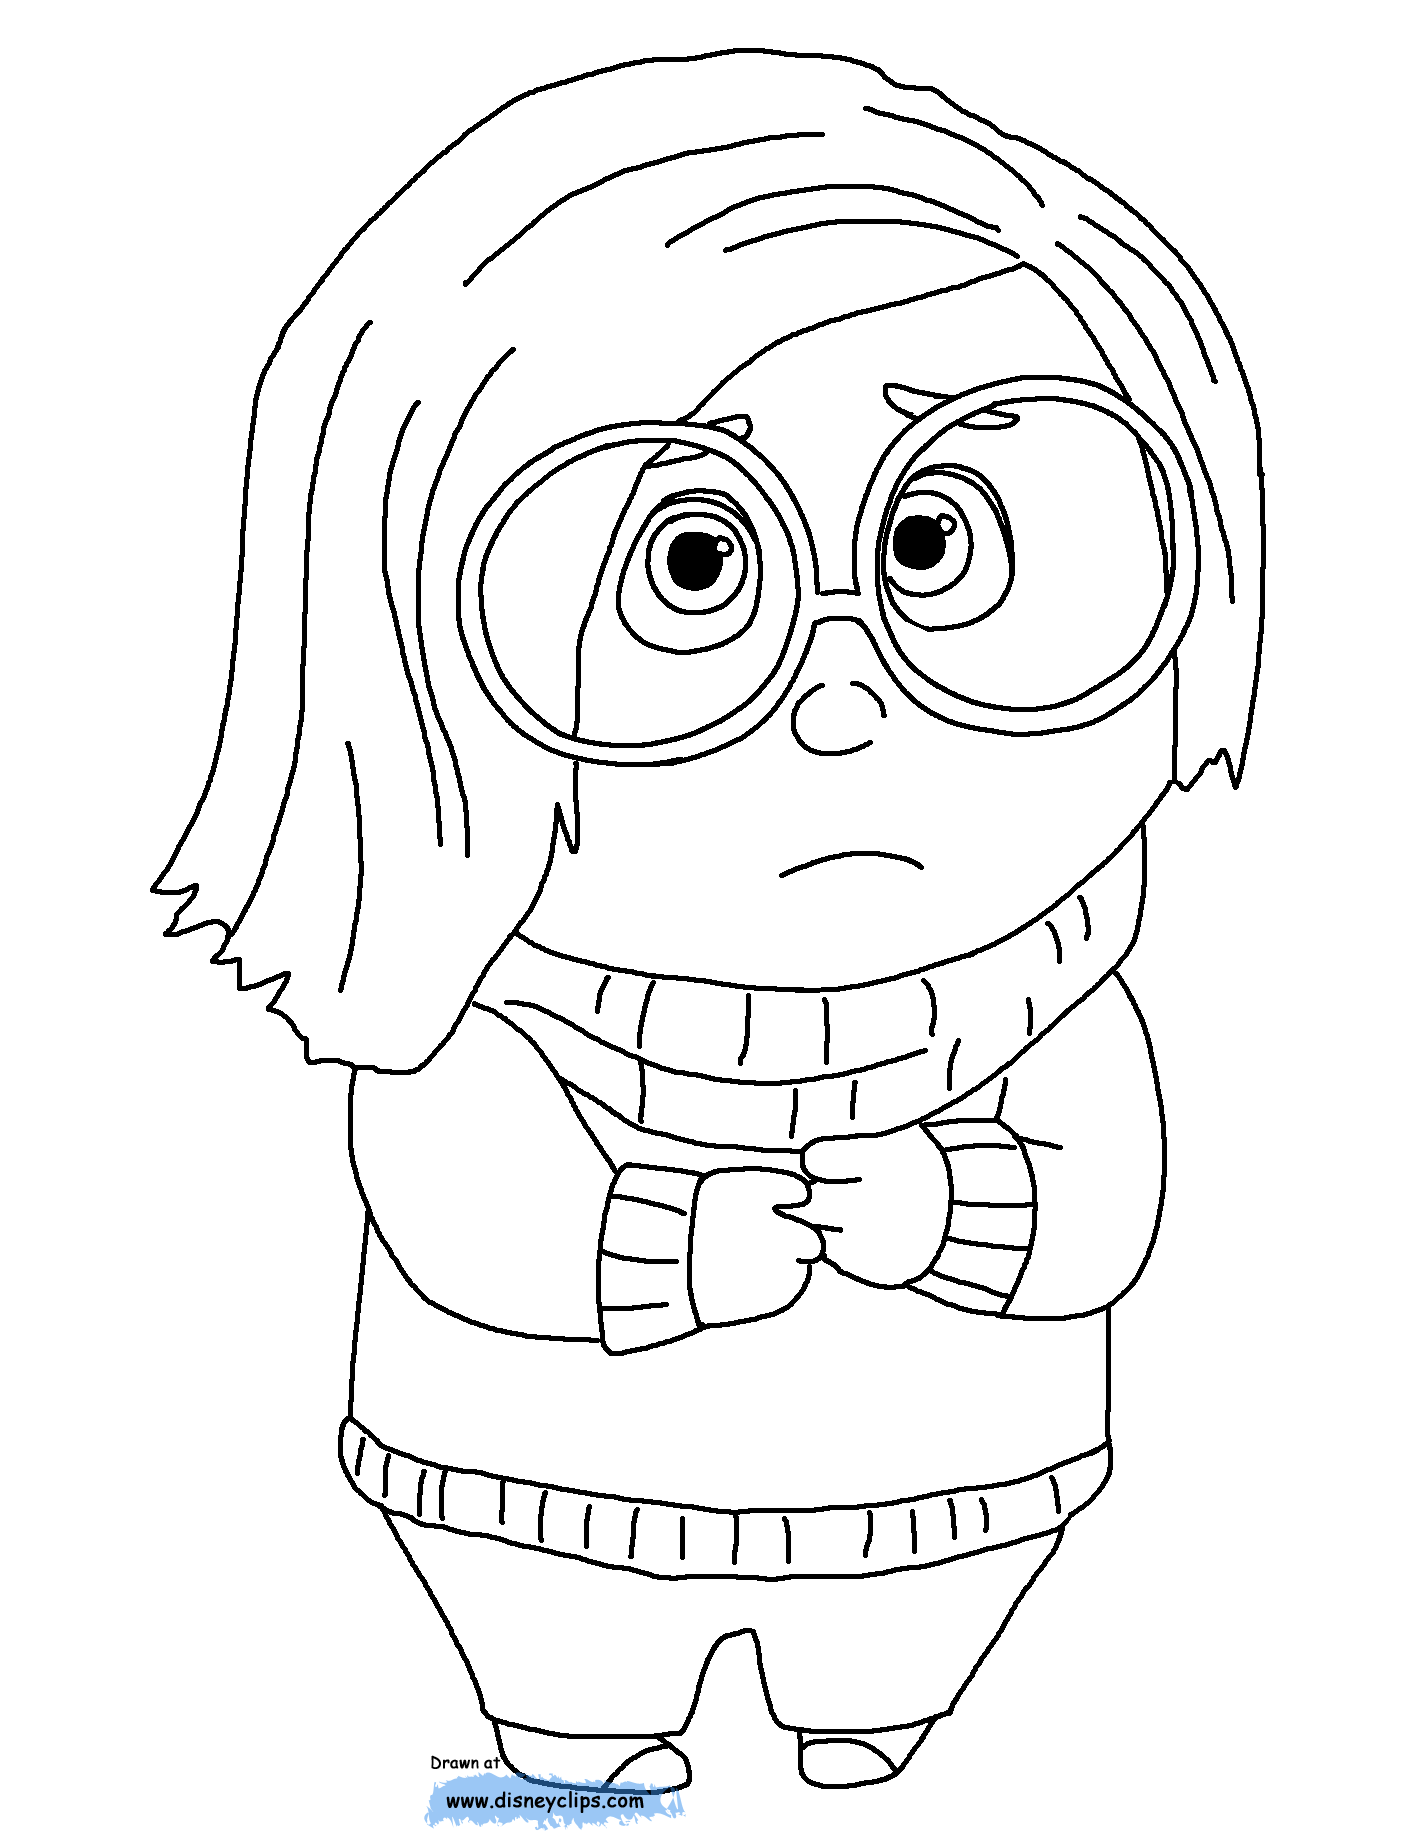 Anger Inside Out Coloring Pages Coloring Pages